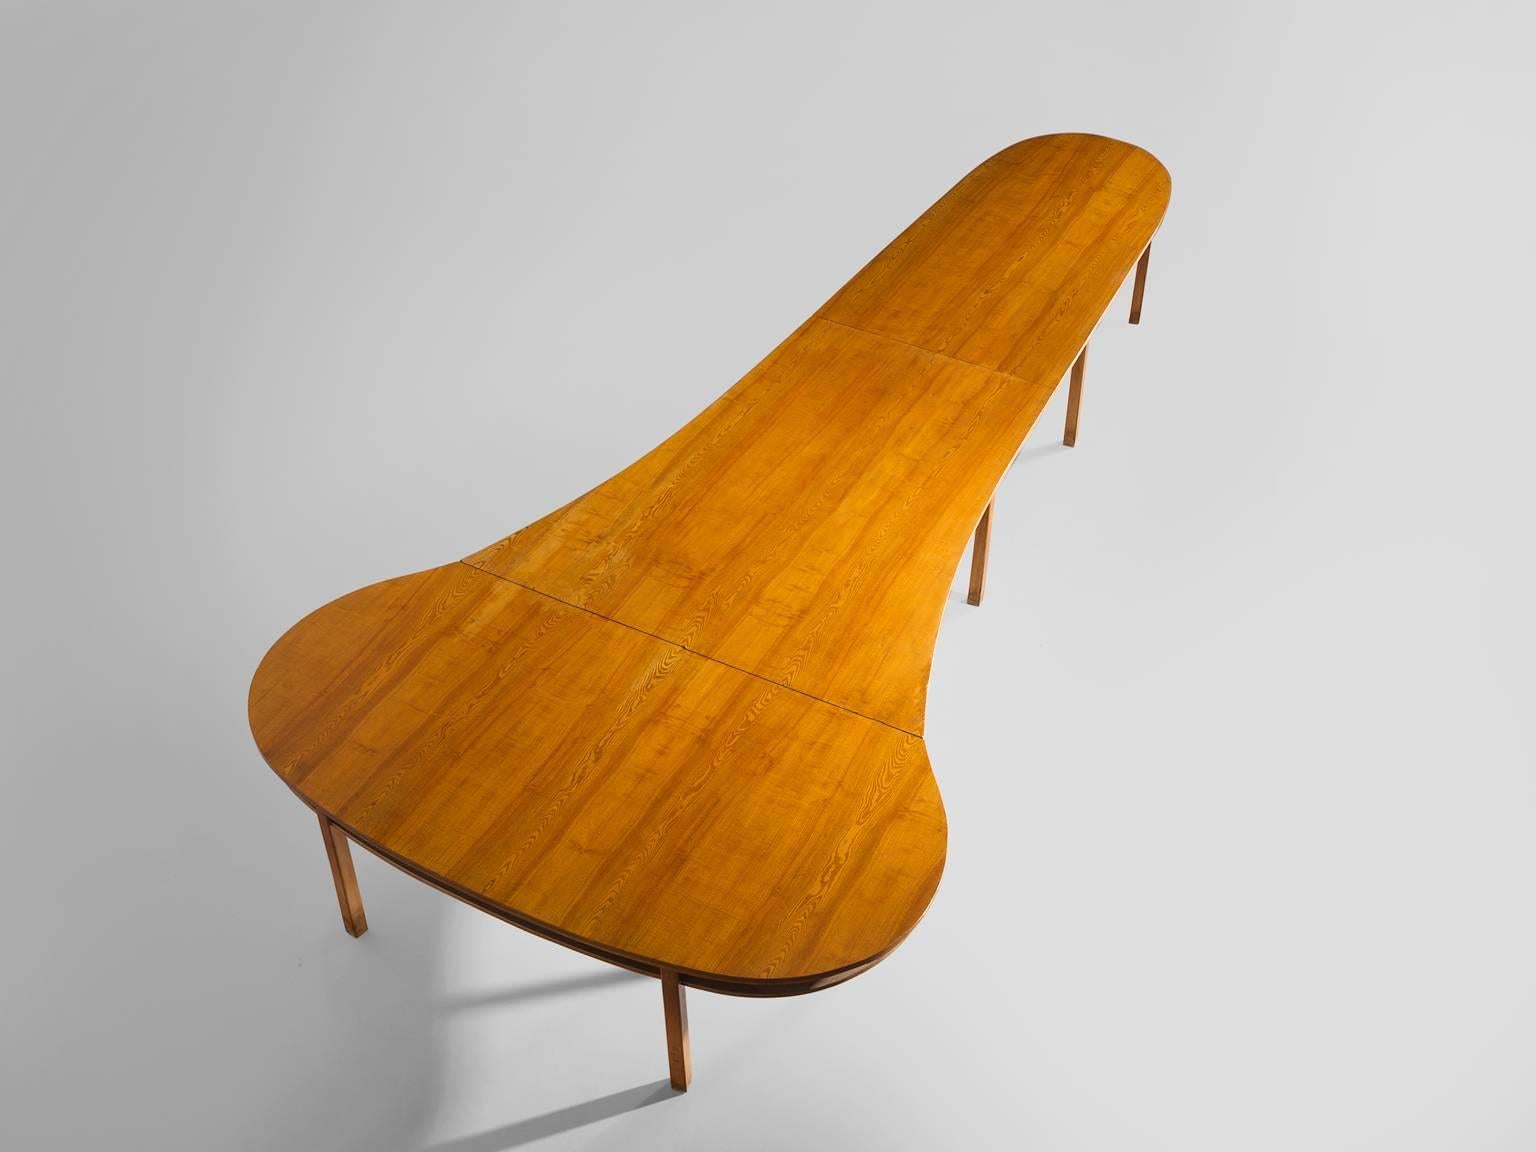 Conference table, oak, Europe, 1950s.

This sadle shaped large table is executed in oak and has a sadle shaped top. The table has eight square legs and a double top. The free-form of this table makes for an excellent table for meetings or other